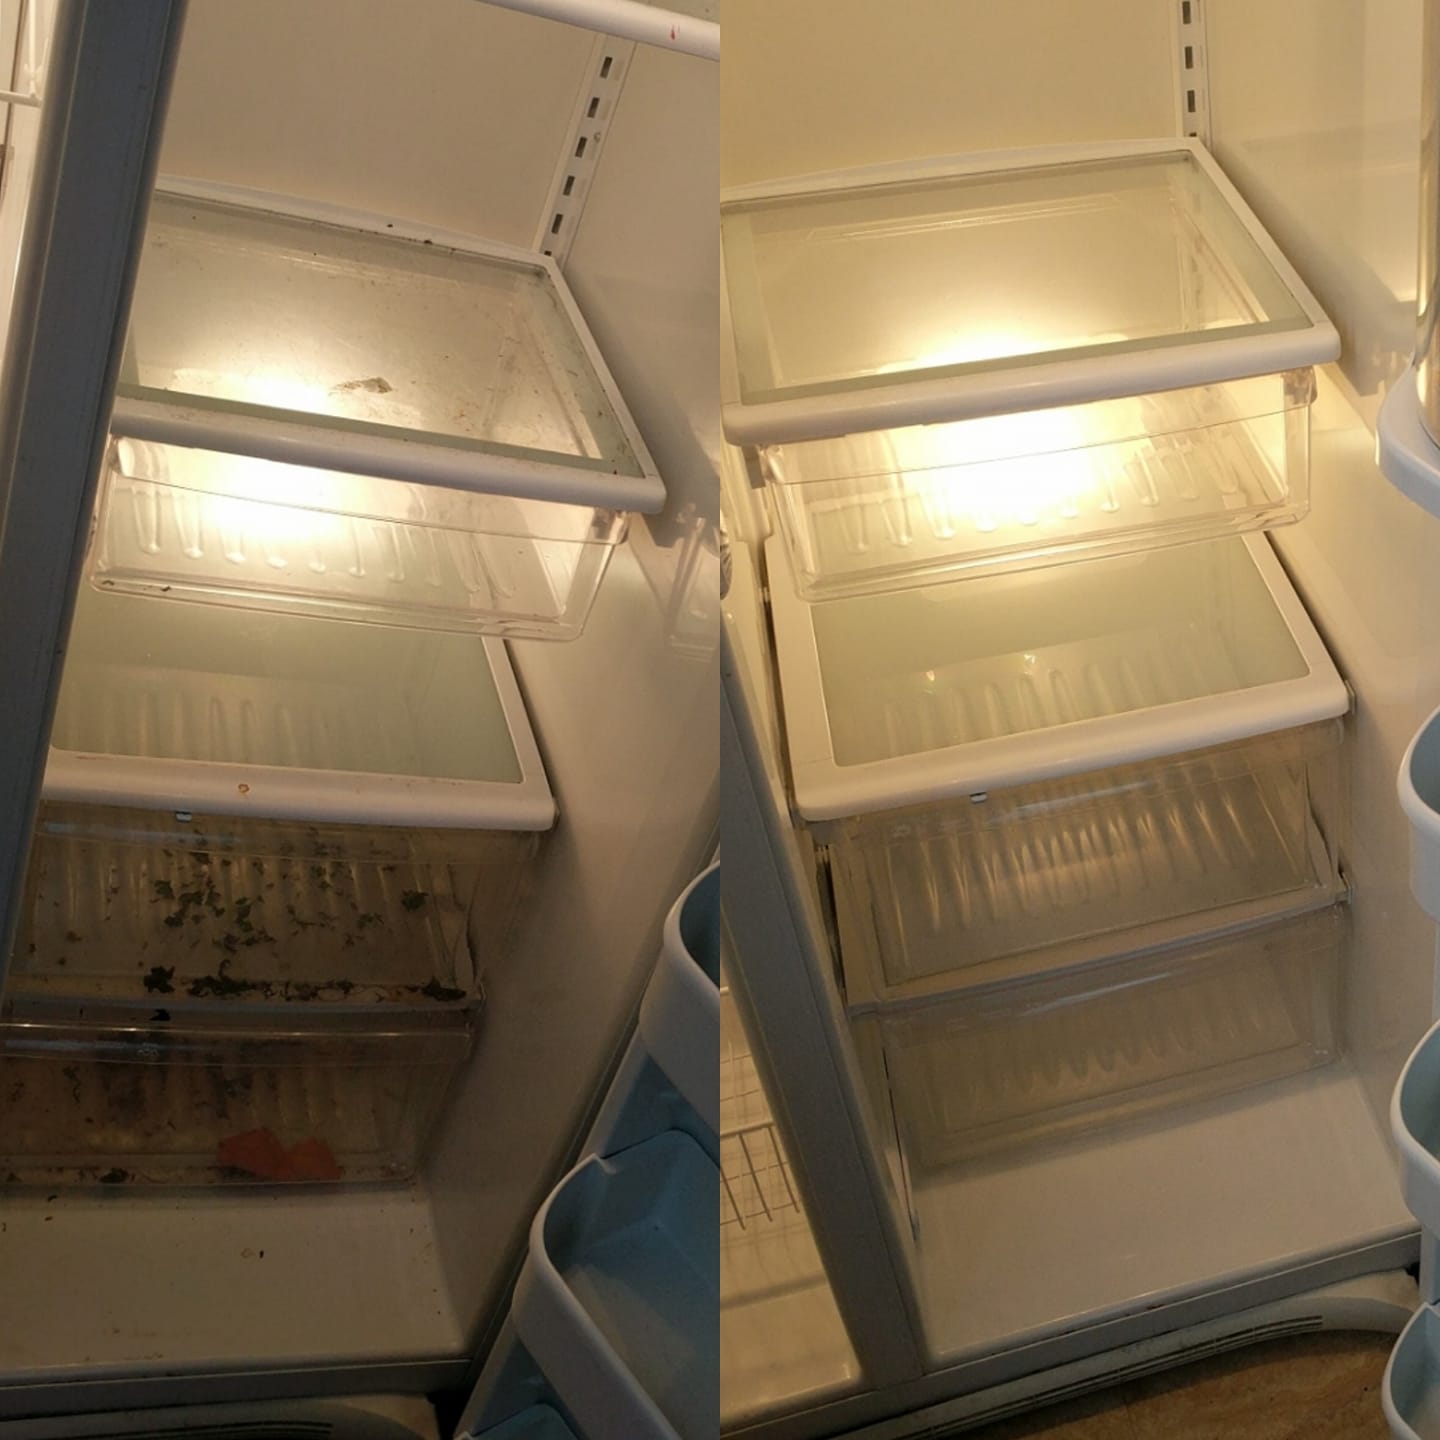 clean fridge before and after